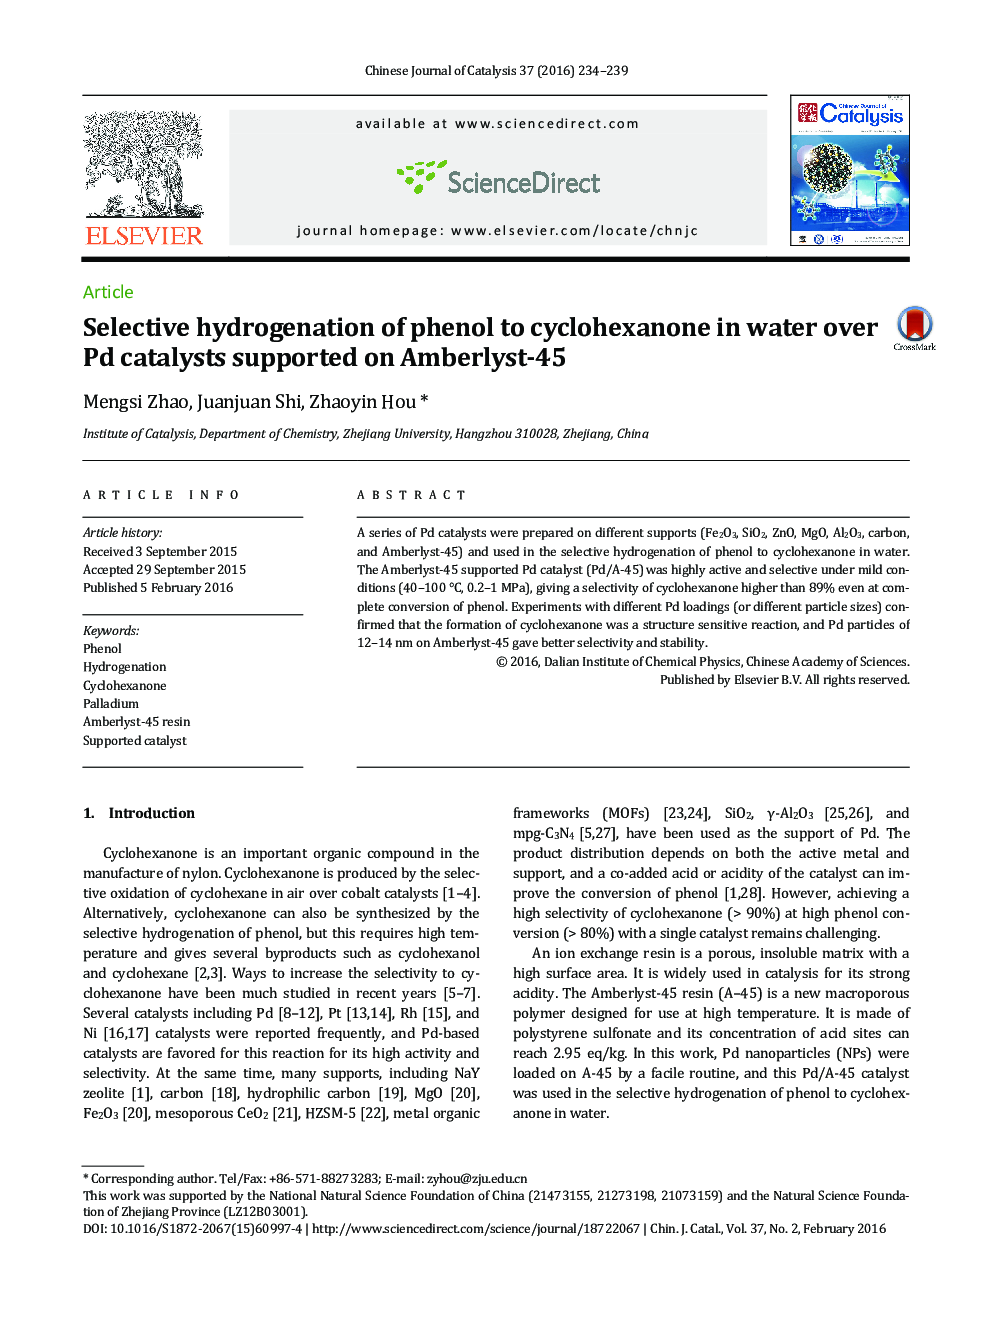 Selective hydrogenation of phenol to cyclohexanone in water over Pd catalysts supported on Amberlyst-45 